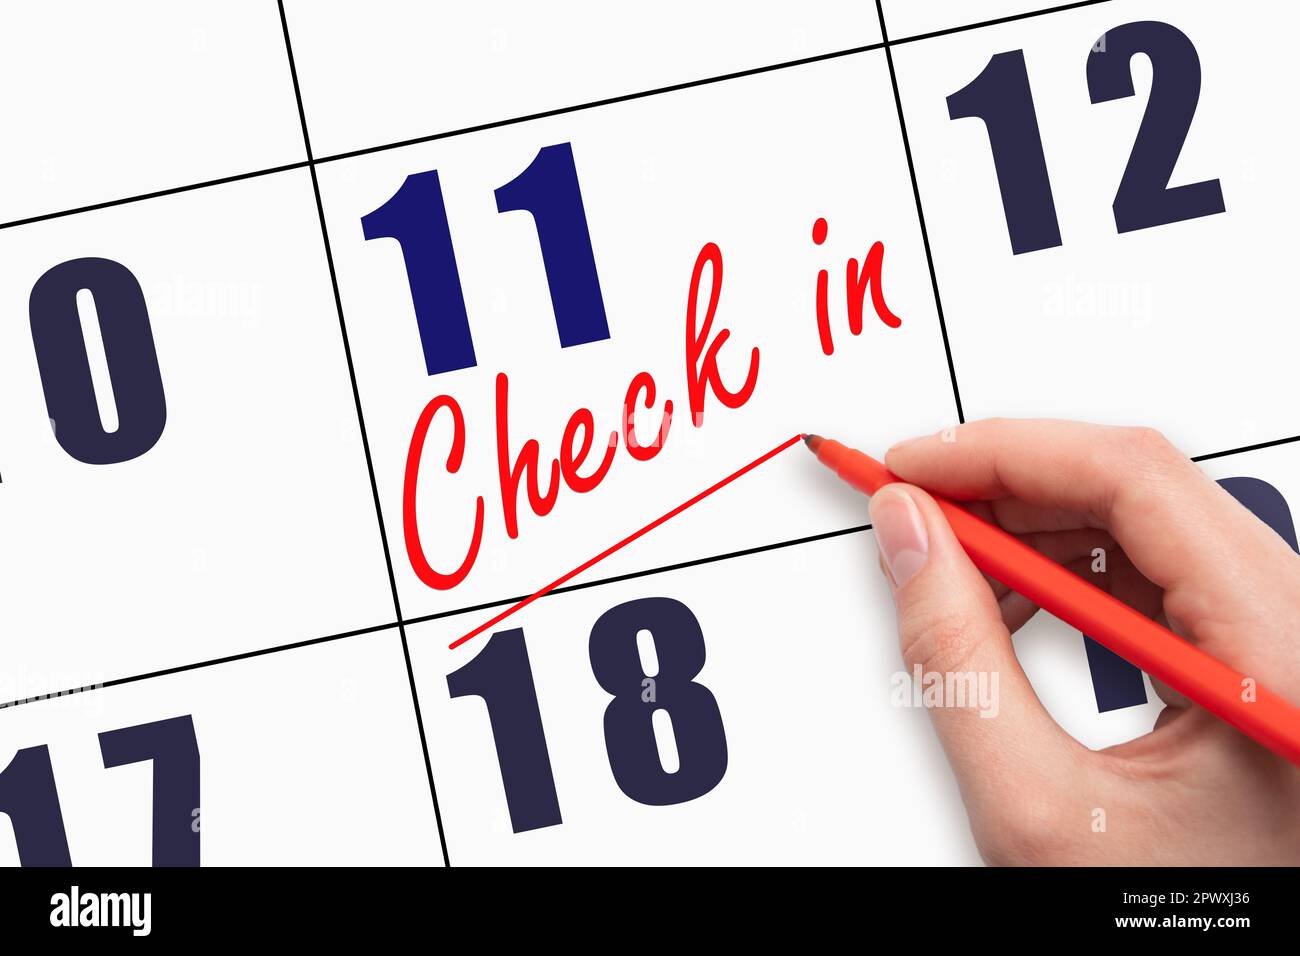 11th day of the month.  Hand writing CHECK IN and drawing a line on calendar date. Business.  Day of the year concept. Stock Photo